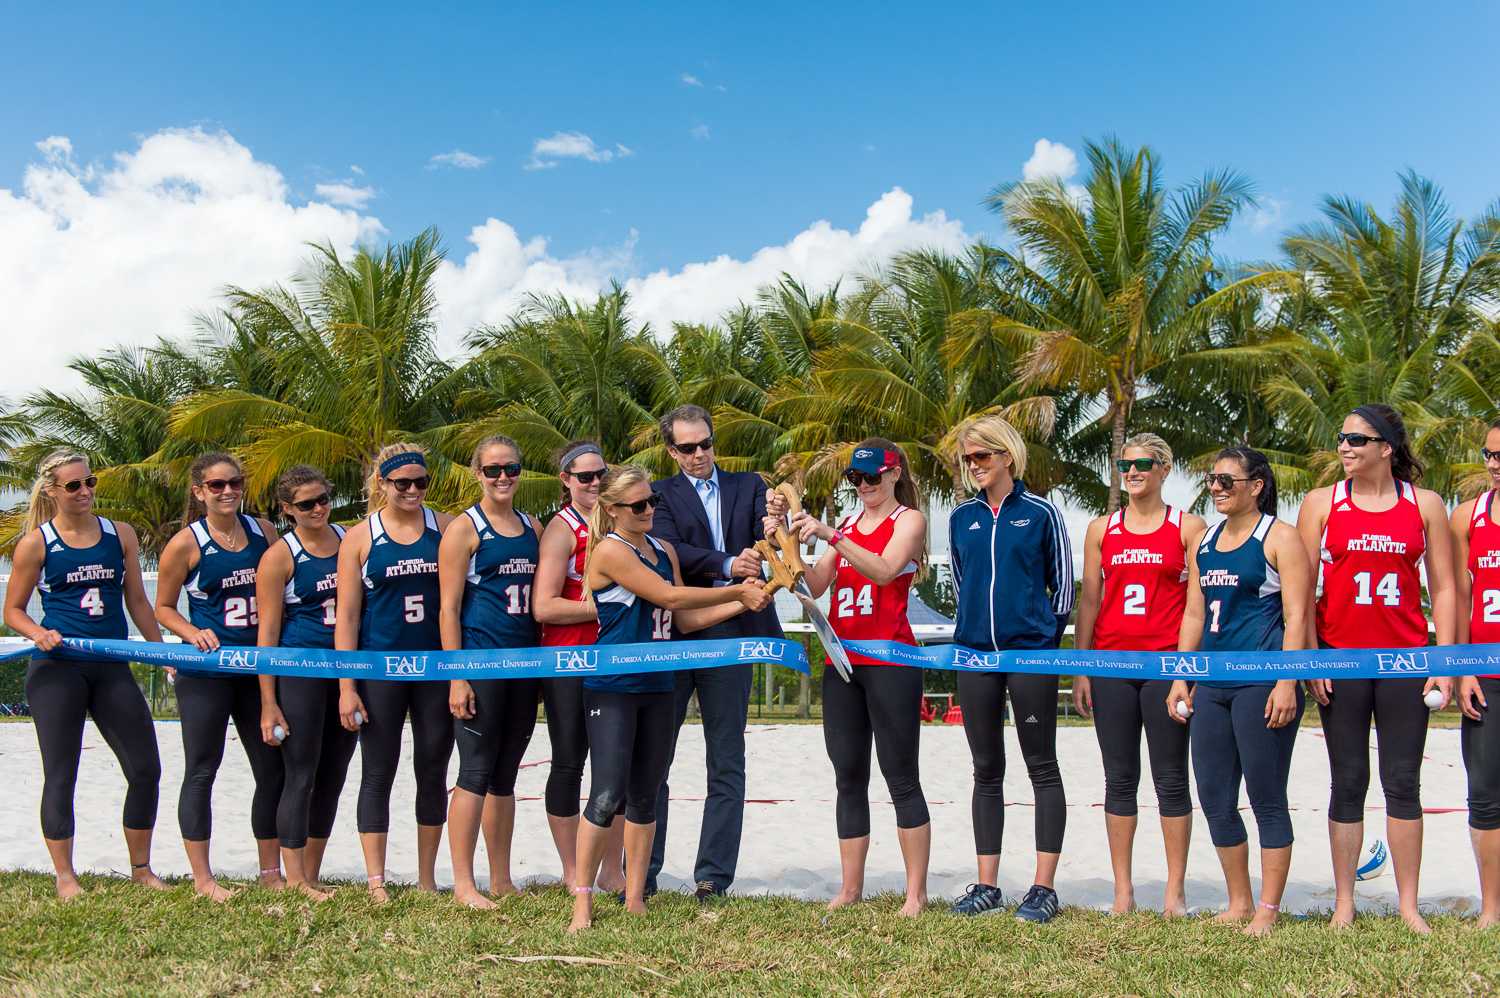 FAU sand volleyball captains Natalie Fraley (12) and Mandy McIntosh (24) are joined by FAU President John Kelly to cut the ribbon to officially open the new sand volleyball courts.